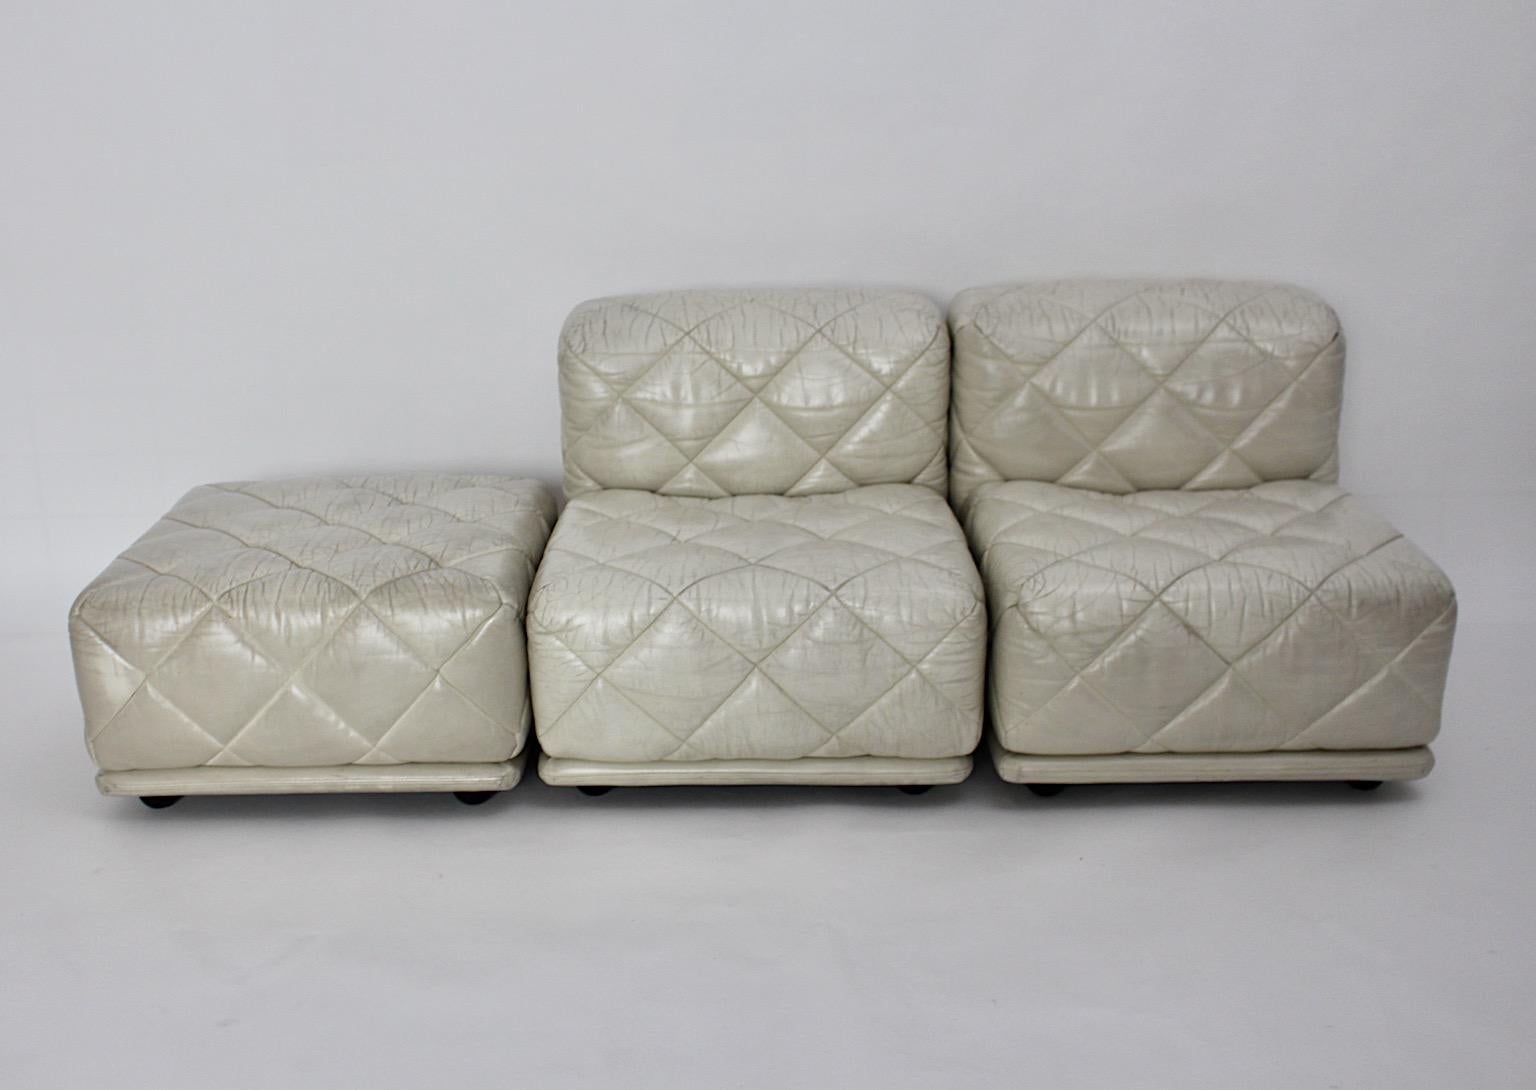 Space Age Vintage Ivory Vintage Leather Lounge Chairs Stool Settee Wittmann 1970 In Fair Condition For Sale In Vienna, AT